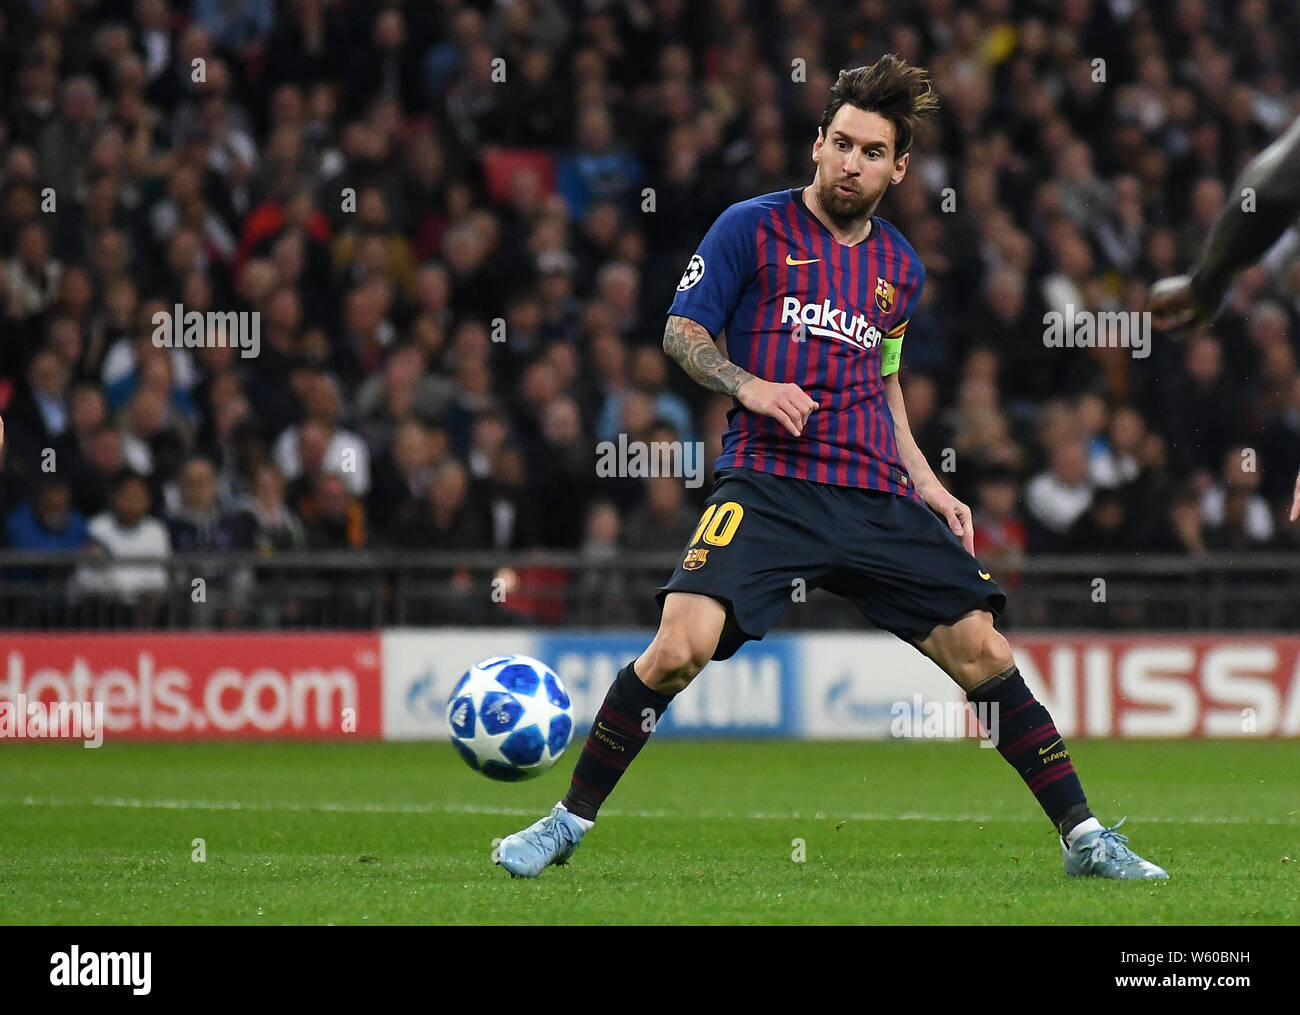 LONDON, ENGLAND - OCTOBER 3, 2018: pictured during the 2018/19 UEFA Champions League Group B game between Tottenham Hotspur (England) and FC Barcelona (Spain) at Wembley Stadium. Stock Photo